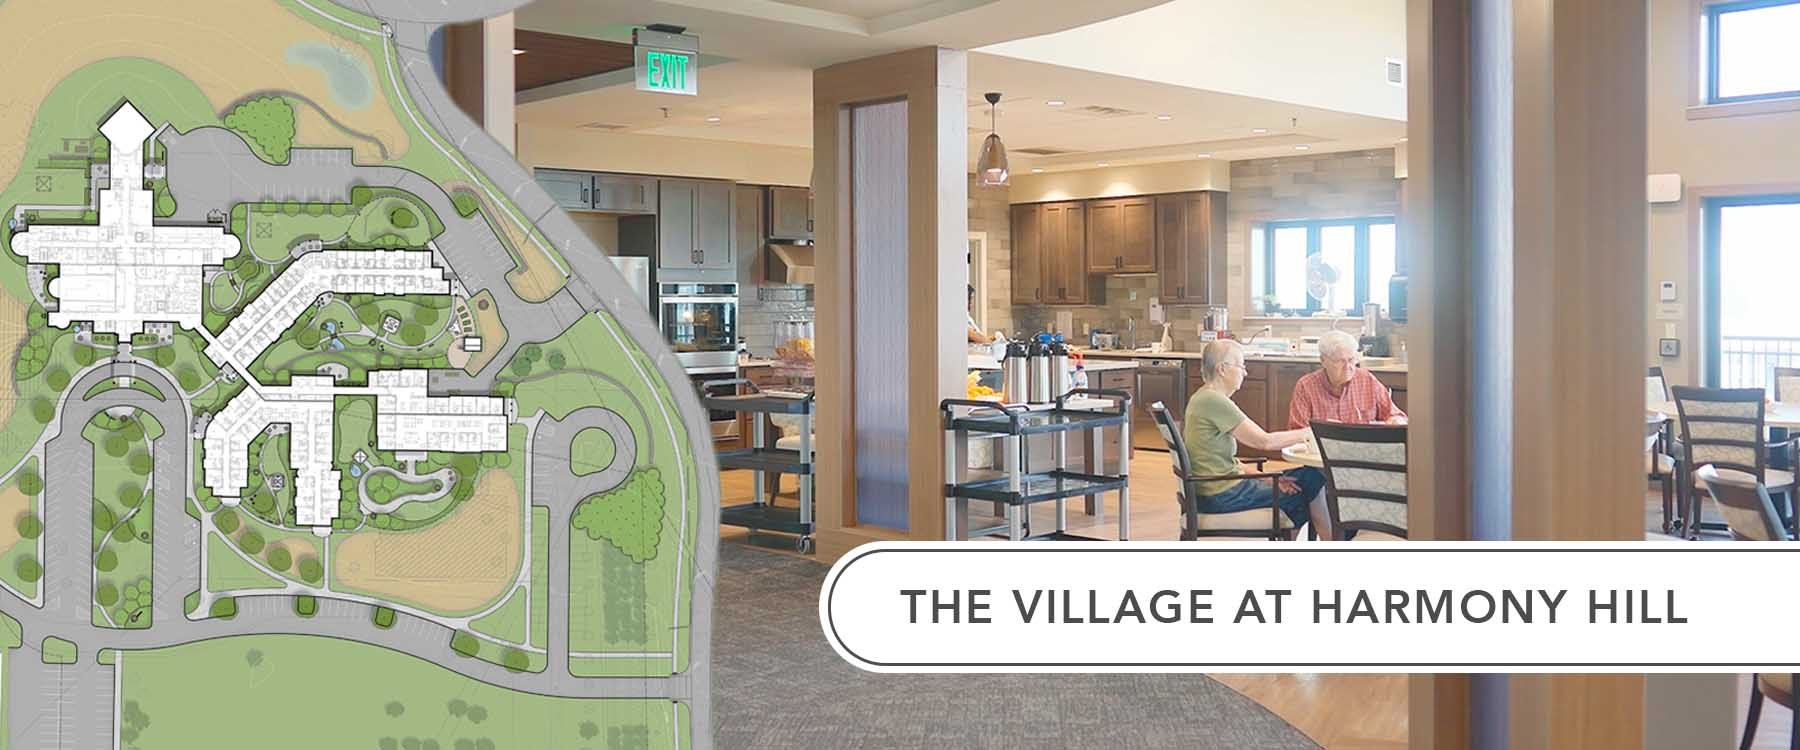 Video presentation of the new Village at Harmony Hill engaged senior living in Watertown South Dakota designed by the Senior Living Architects at Plunkett Raysich Architects, LLP